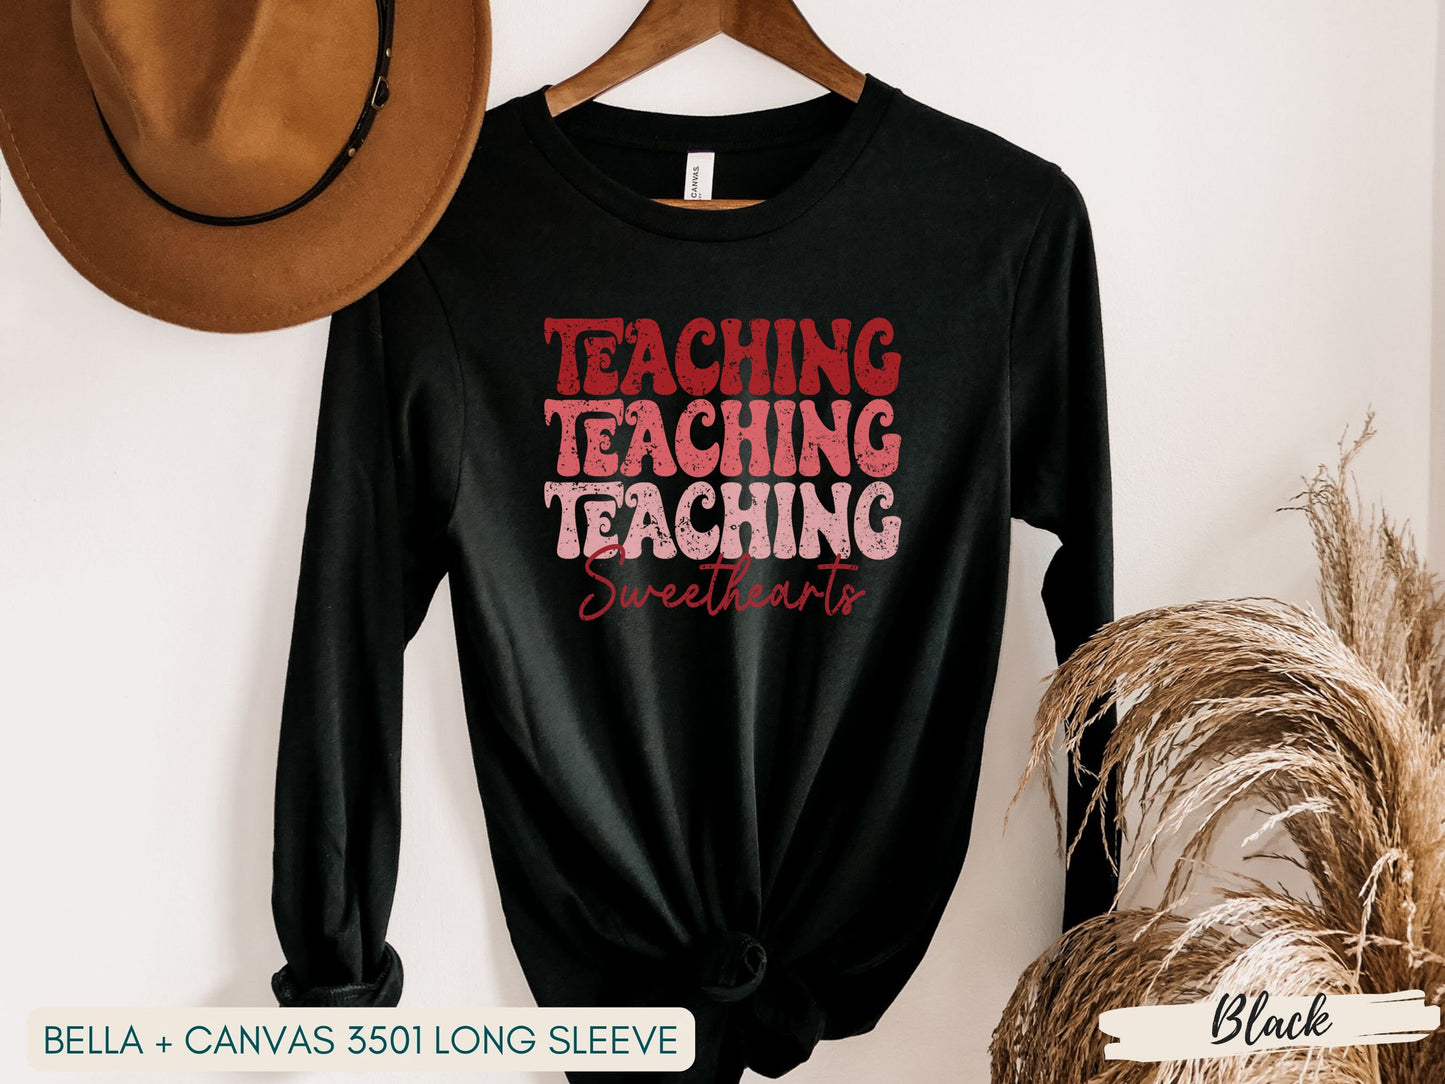 Teaching Sweethearts T-Shirt - Fun Pink Text Design for Valentine's Day